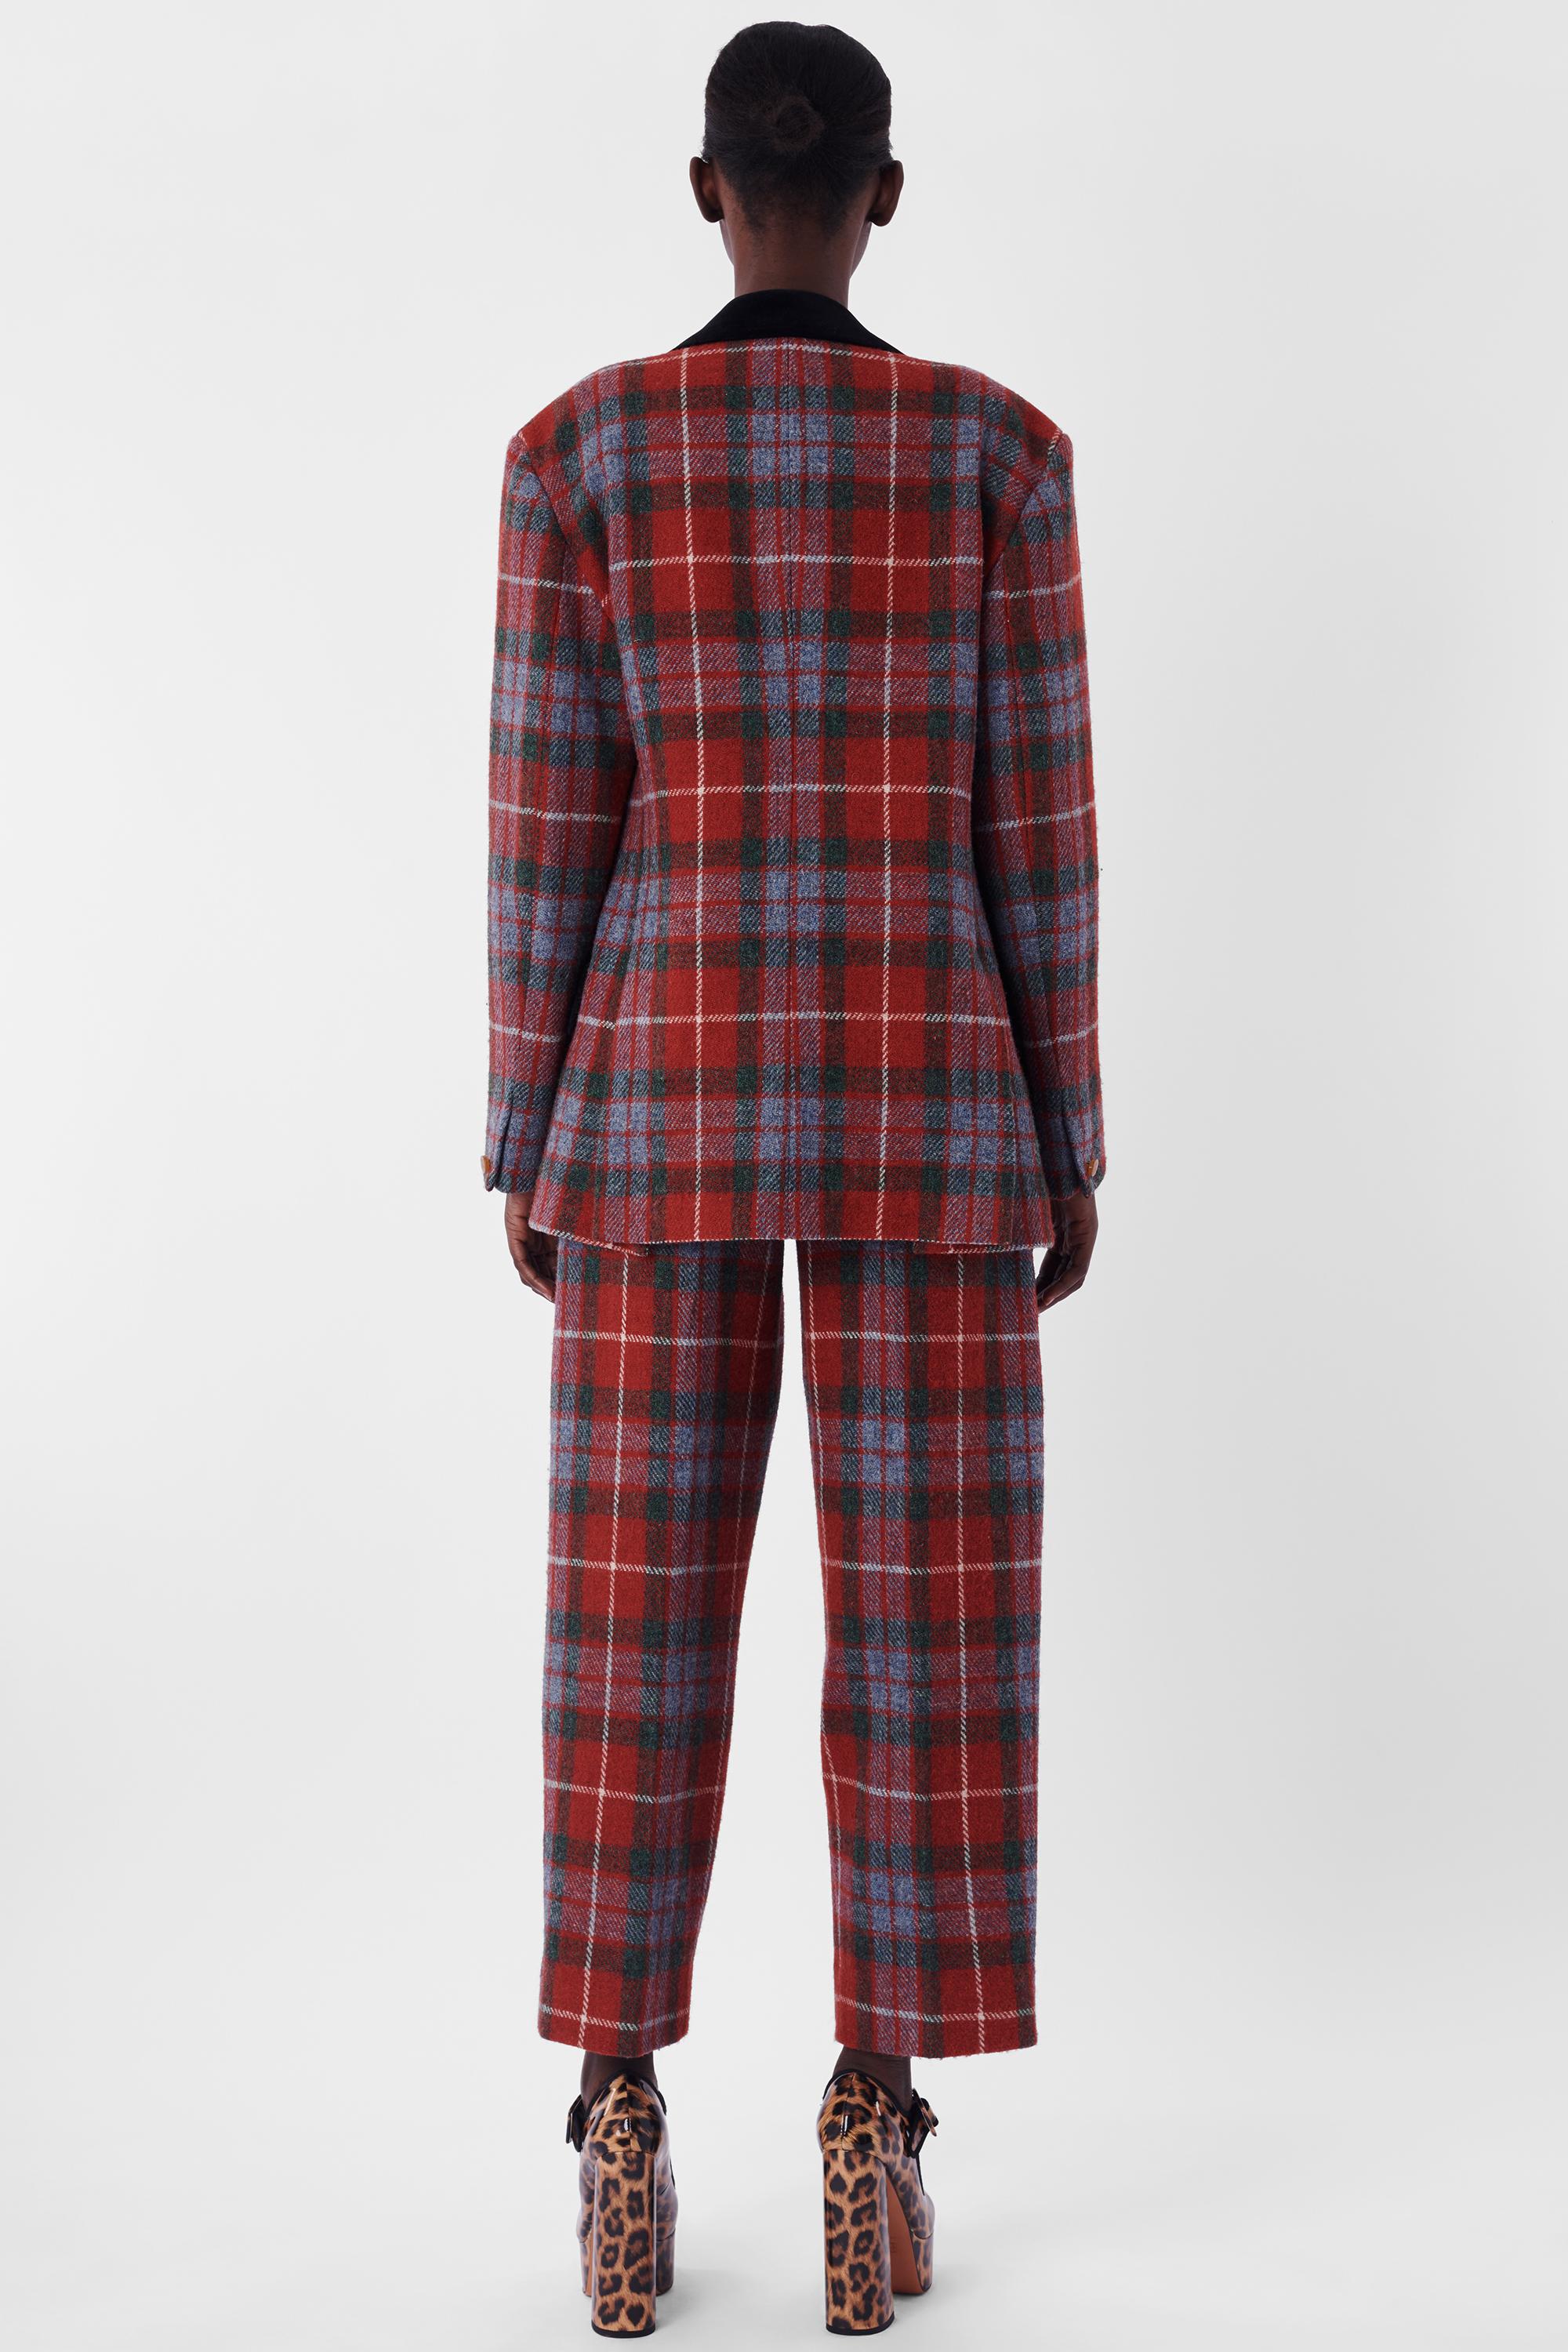 We are excited to present this Vivienne Westwood Vintage A/W 1991 Dressing Up Collection Harris Tweed Tartan Suit. Features red tartan with black velvet collar and pocket flaps. High waisted trousers with buckle in the back, hook and zipper for